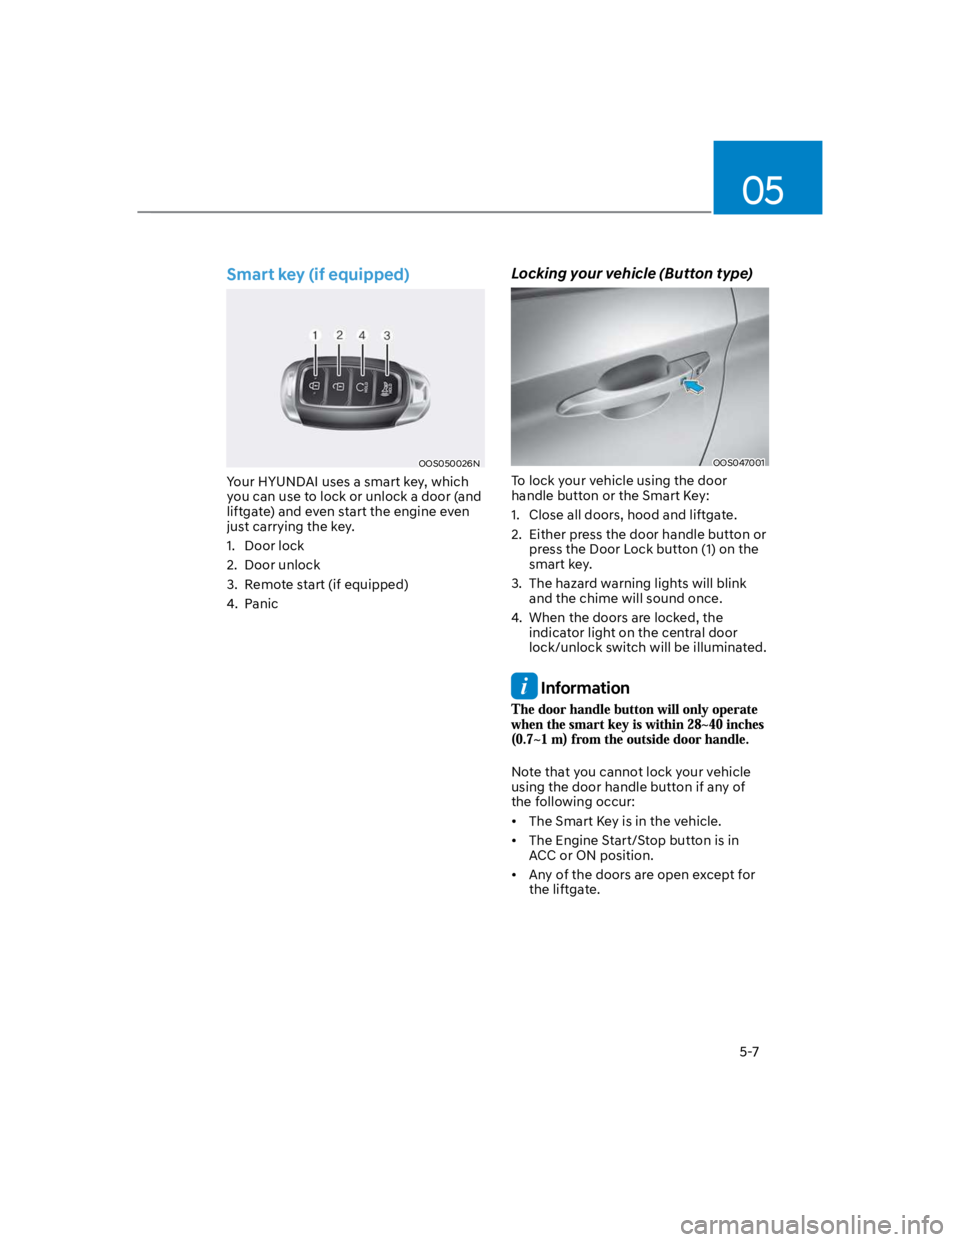 HYUNDAI KONA 2022 Workshop Manual 05
5-7
Smart key (if equipped)
OOS050026N
Your HYUNDAI uses a smart key, which 
you can use to lock or unlock a door (and 
liftgate) and even start the engine even 
just carrying the key.
1.  Door loc